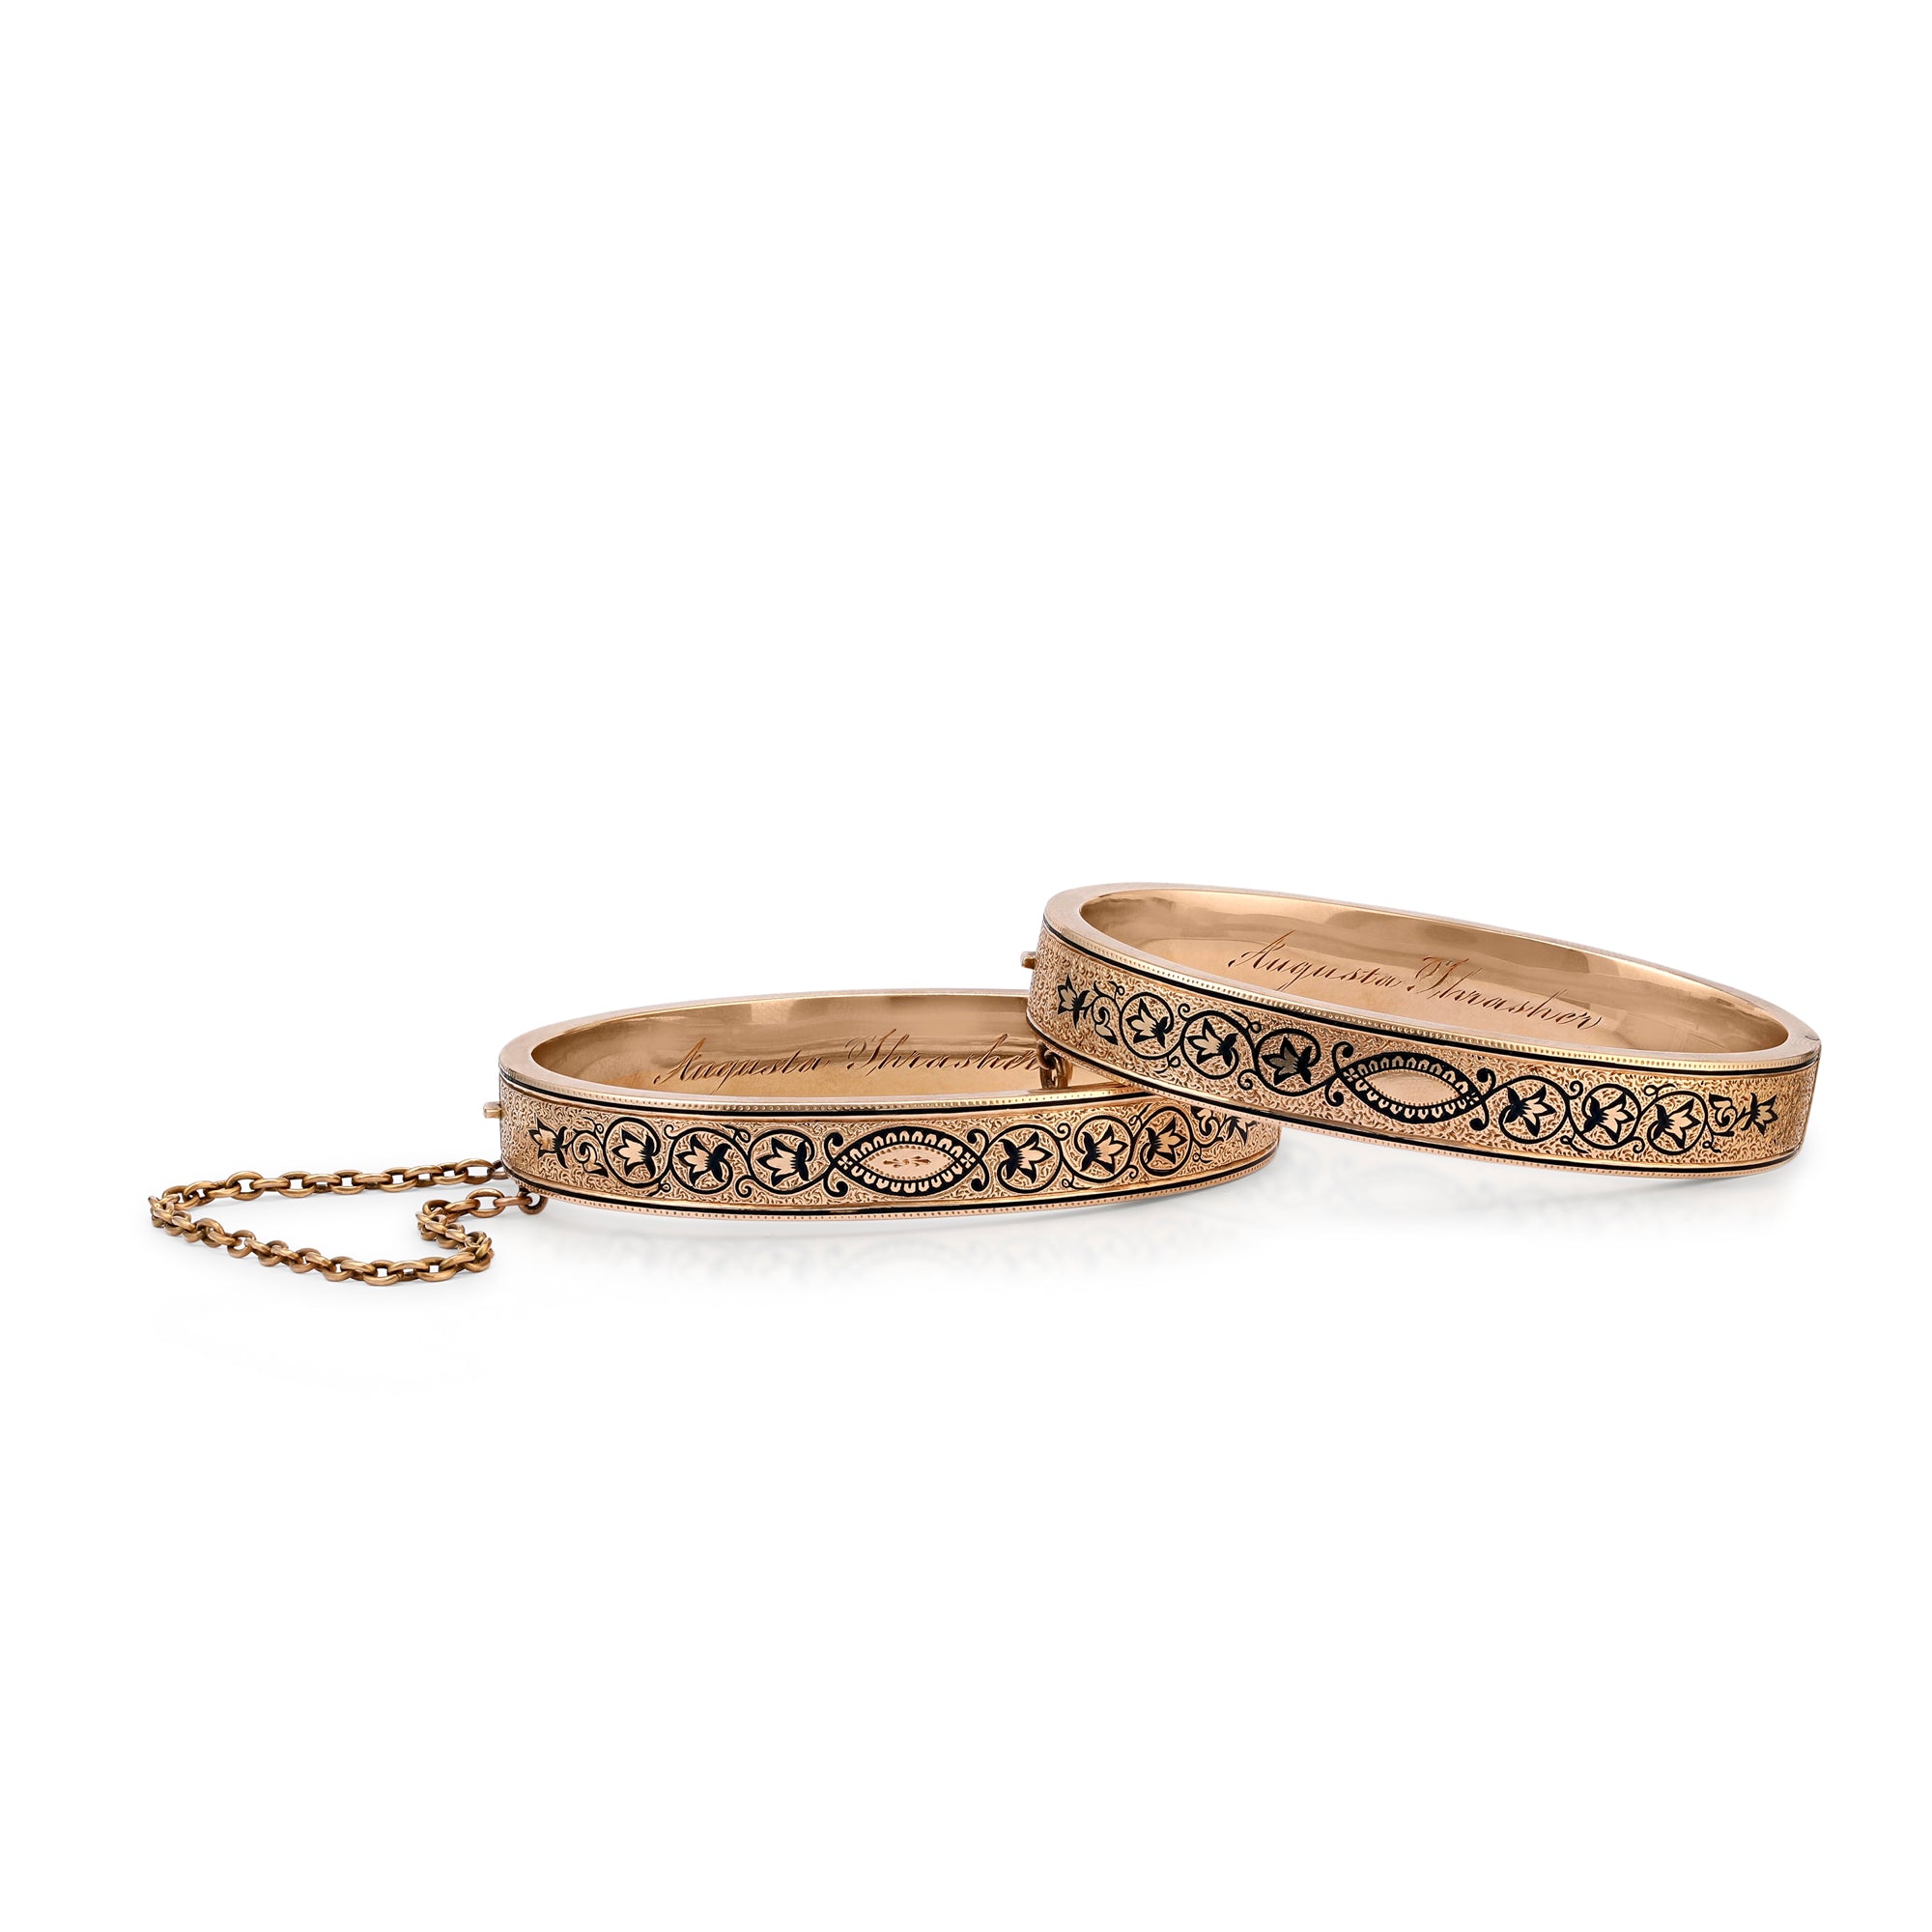 Antique set of Victorian wedding bangles with floral motif in taille d'epargné. 